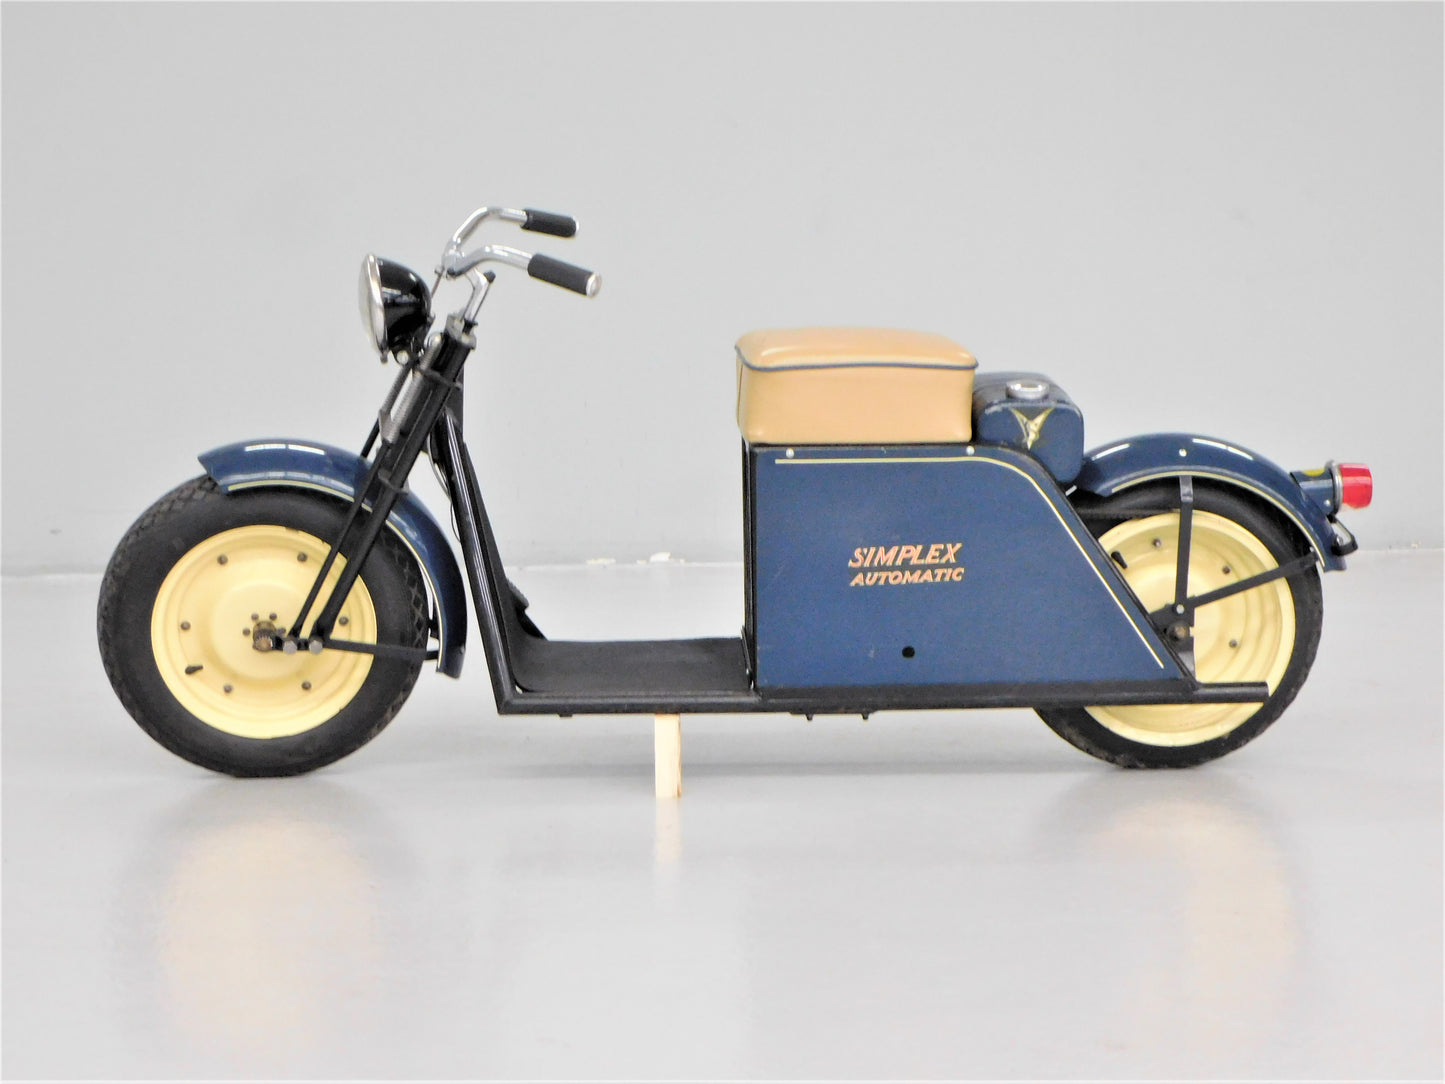 Late 1950's Simplex Automatic Scooter